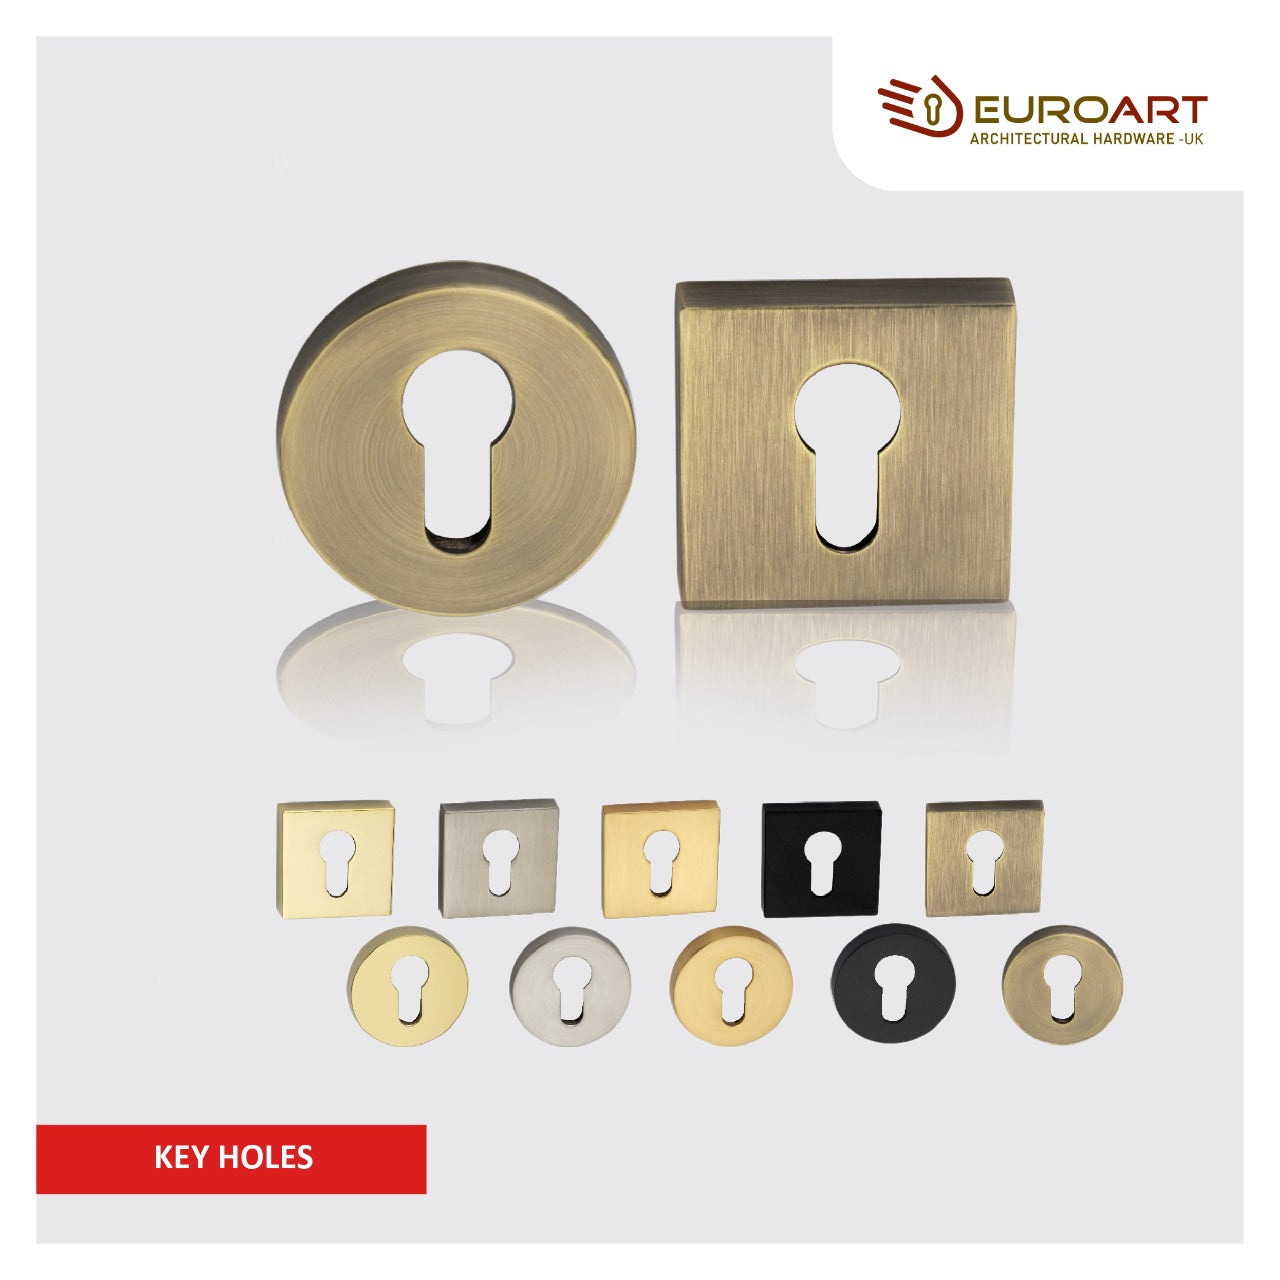 Elegant and functional EuroArt Key Holes by M. M. Noorbhoy & Co - High-quality door hardware for a stylish touch.